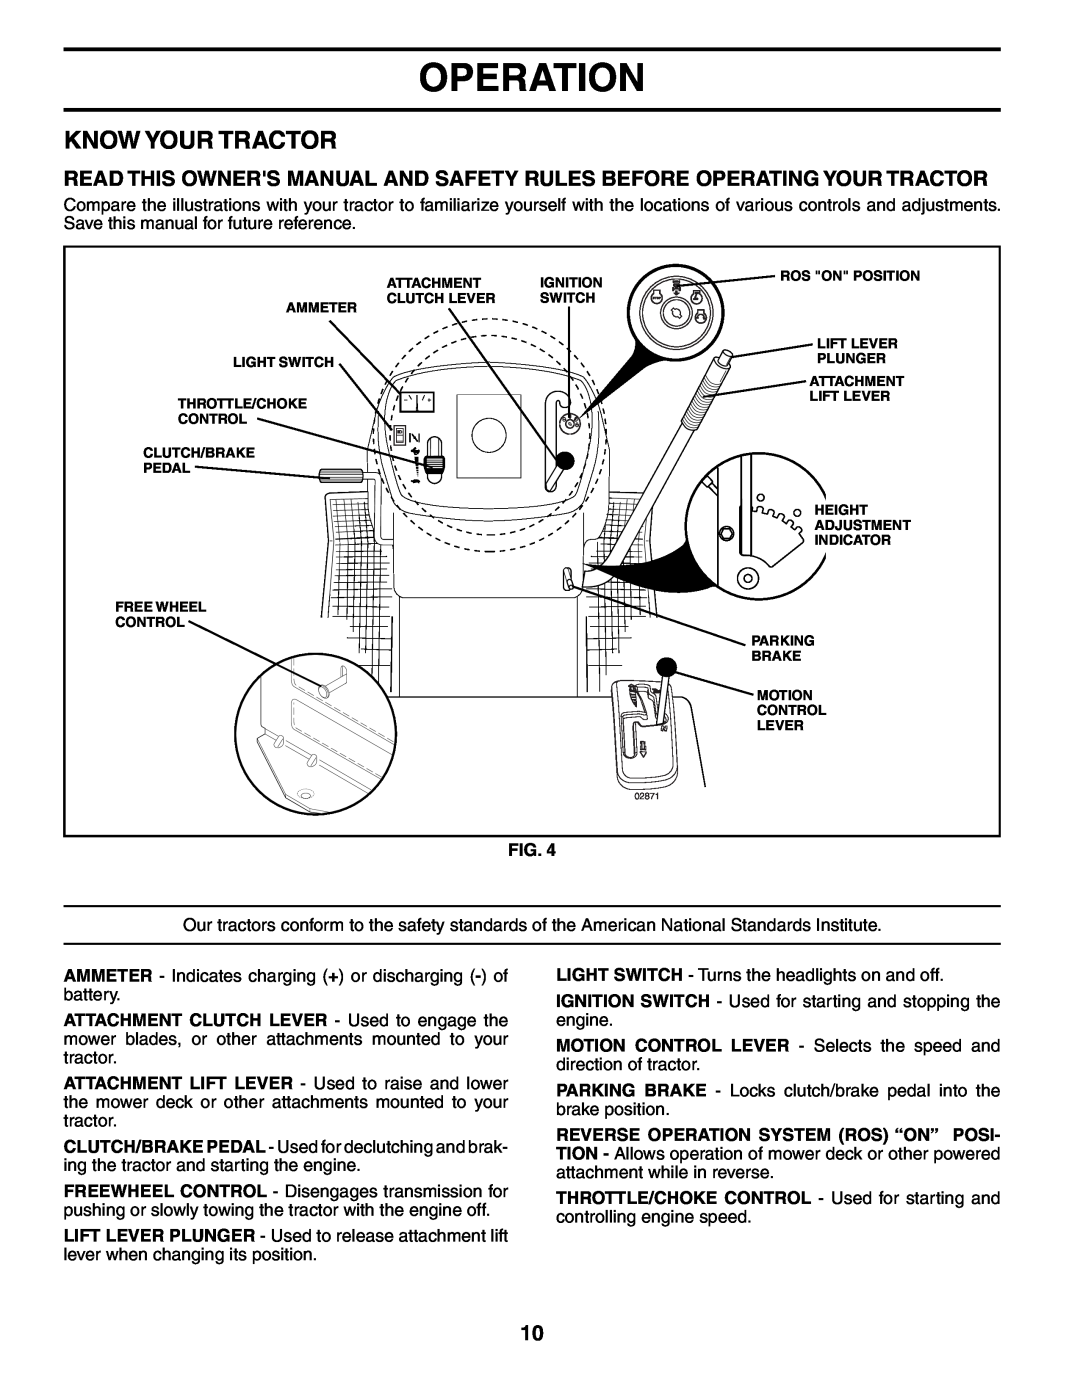 Ryobi 197788 manual Know Your Tractor, Operation 